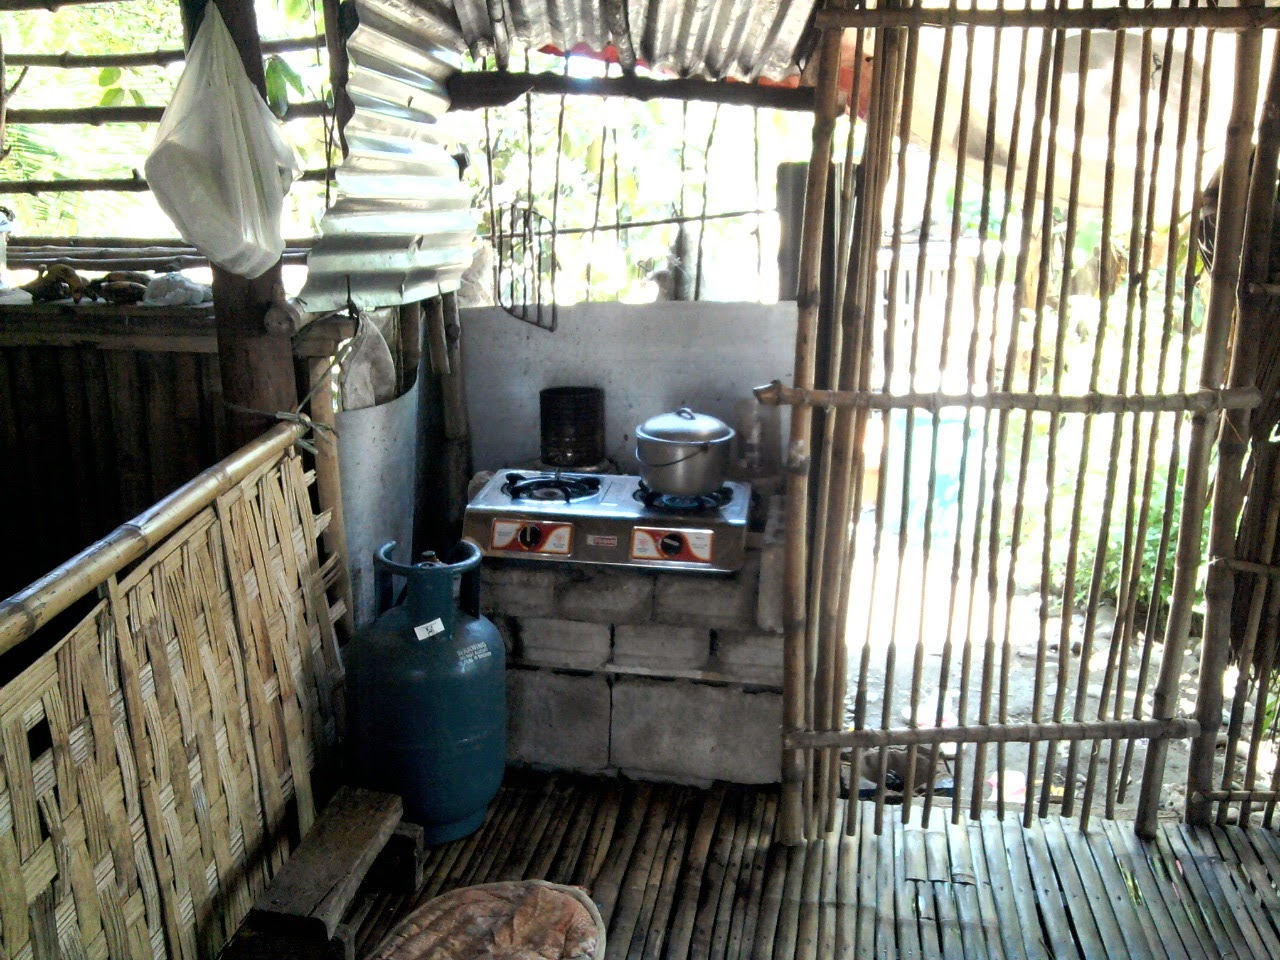 RiceLand and Mangoes: Our Humble Bahay Kubo in Bayto